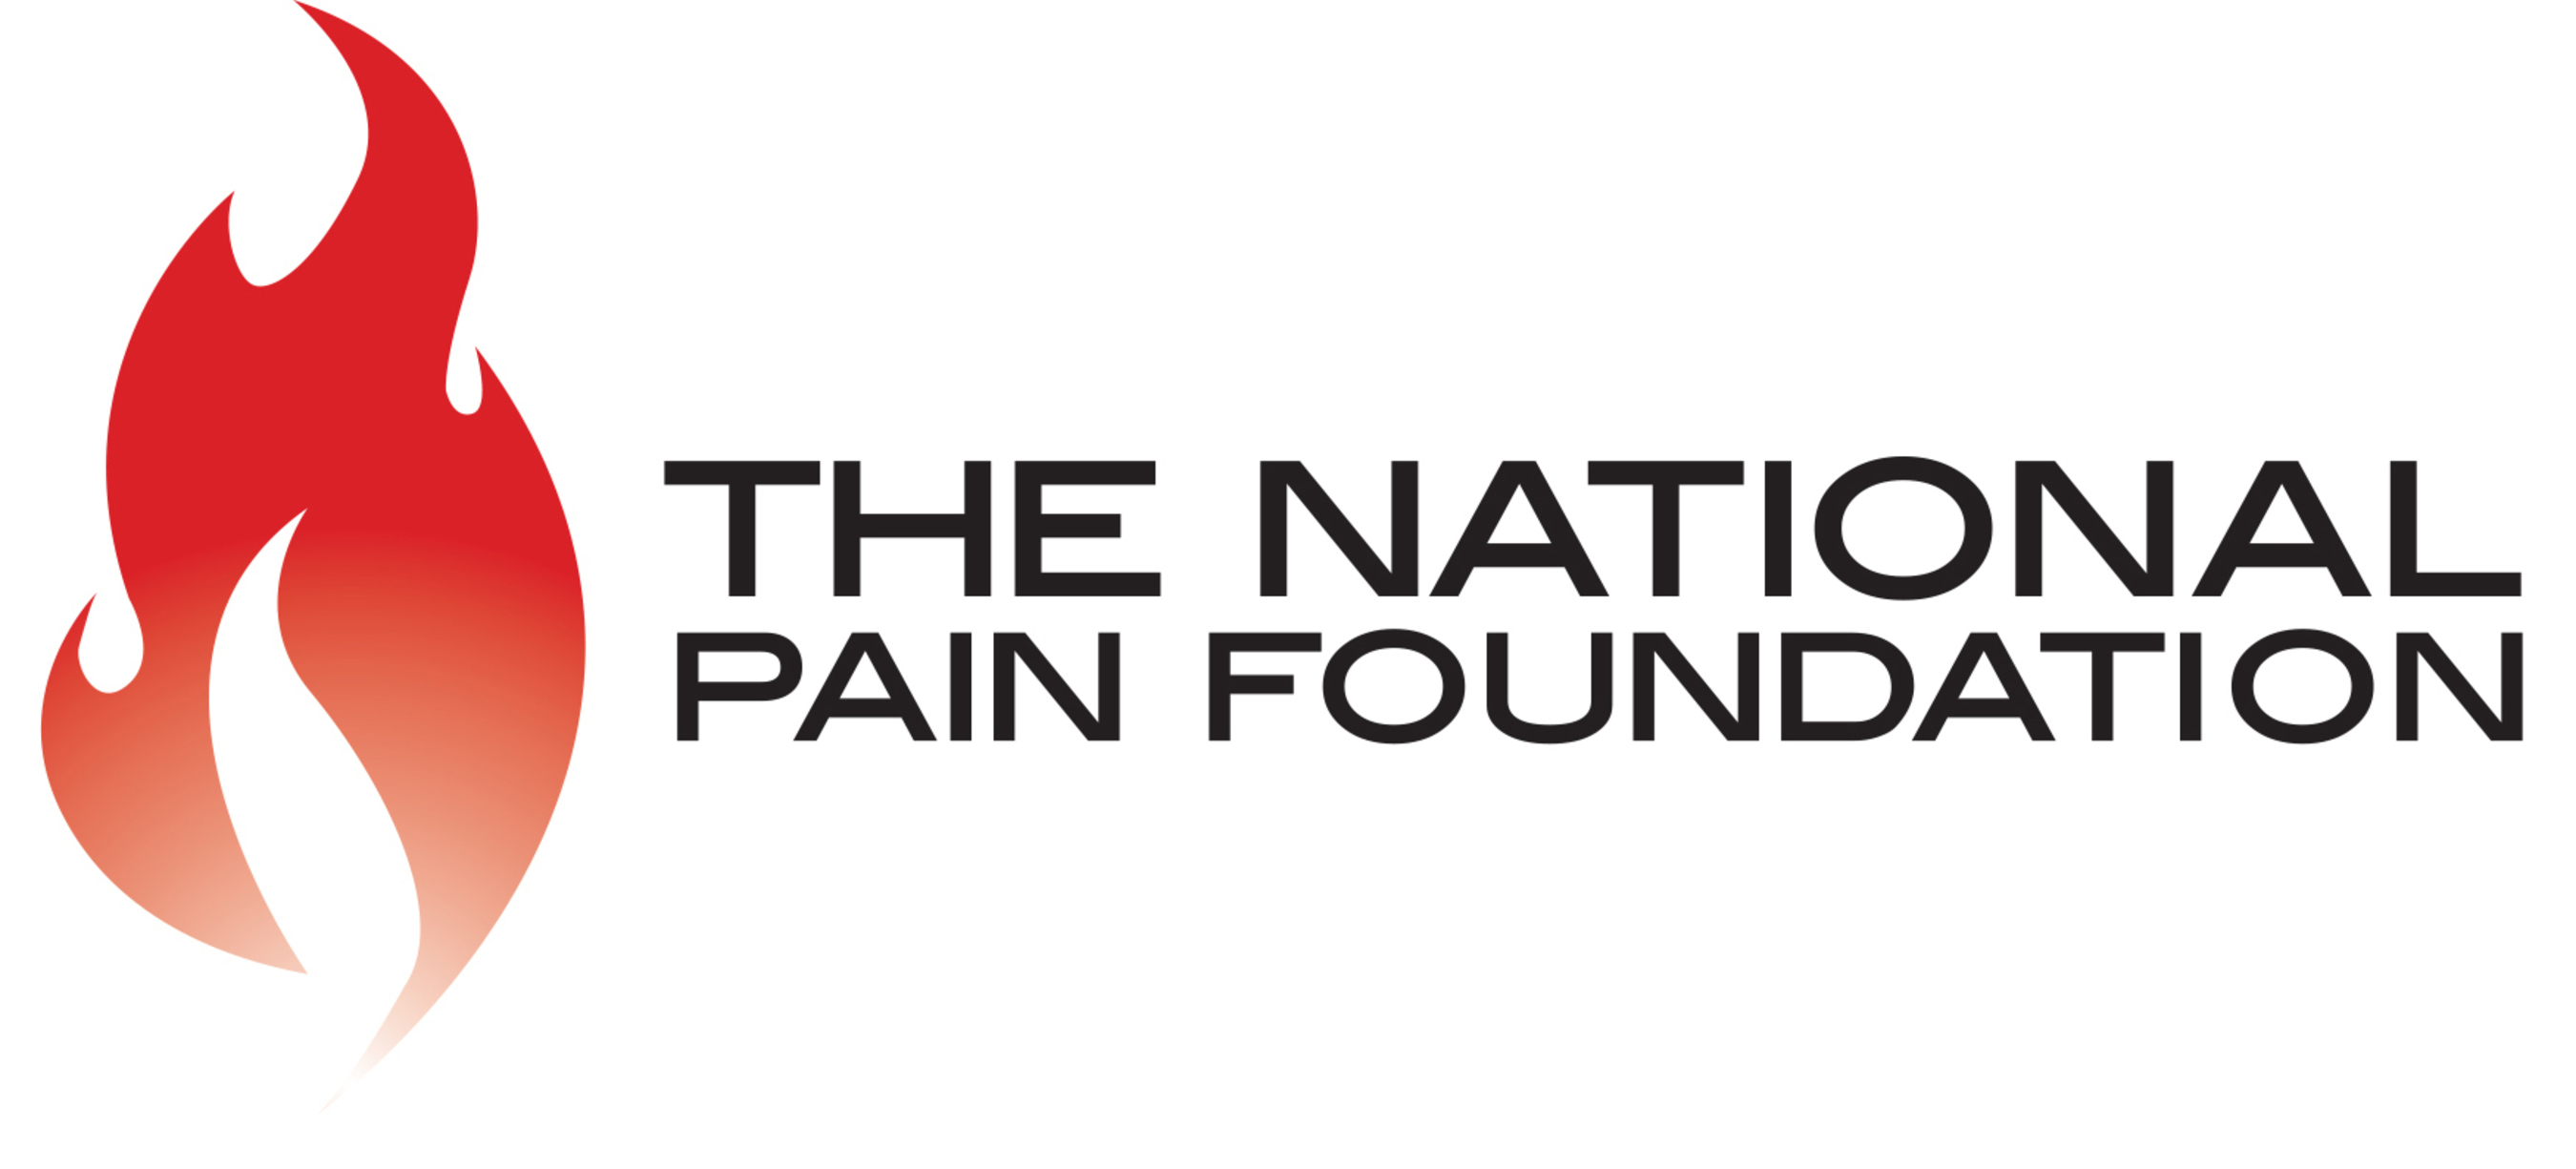 The National Pain Foundation
 (PRNewsFoto/The National Pain Foundation)